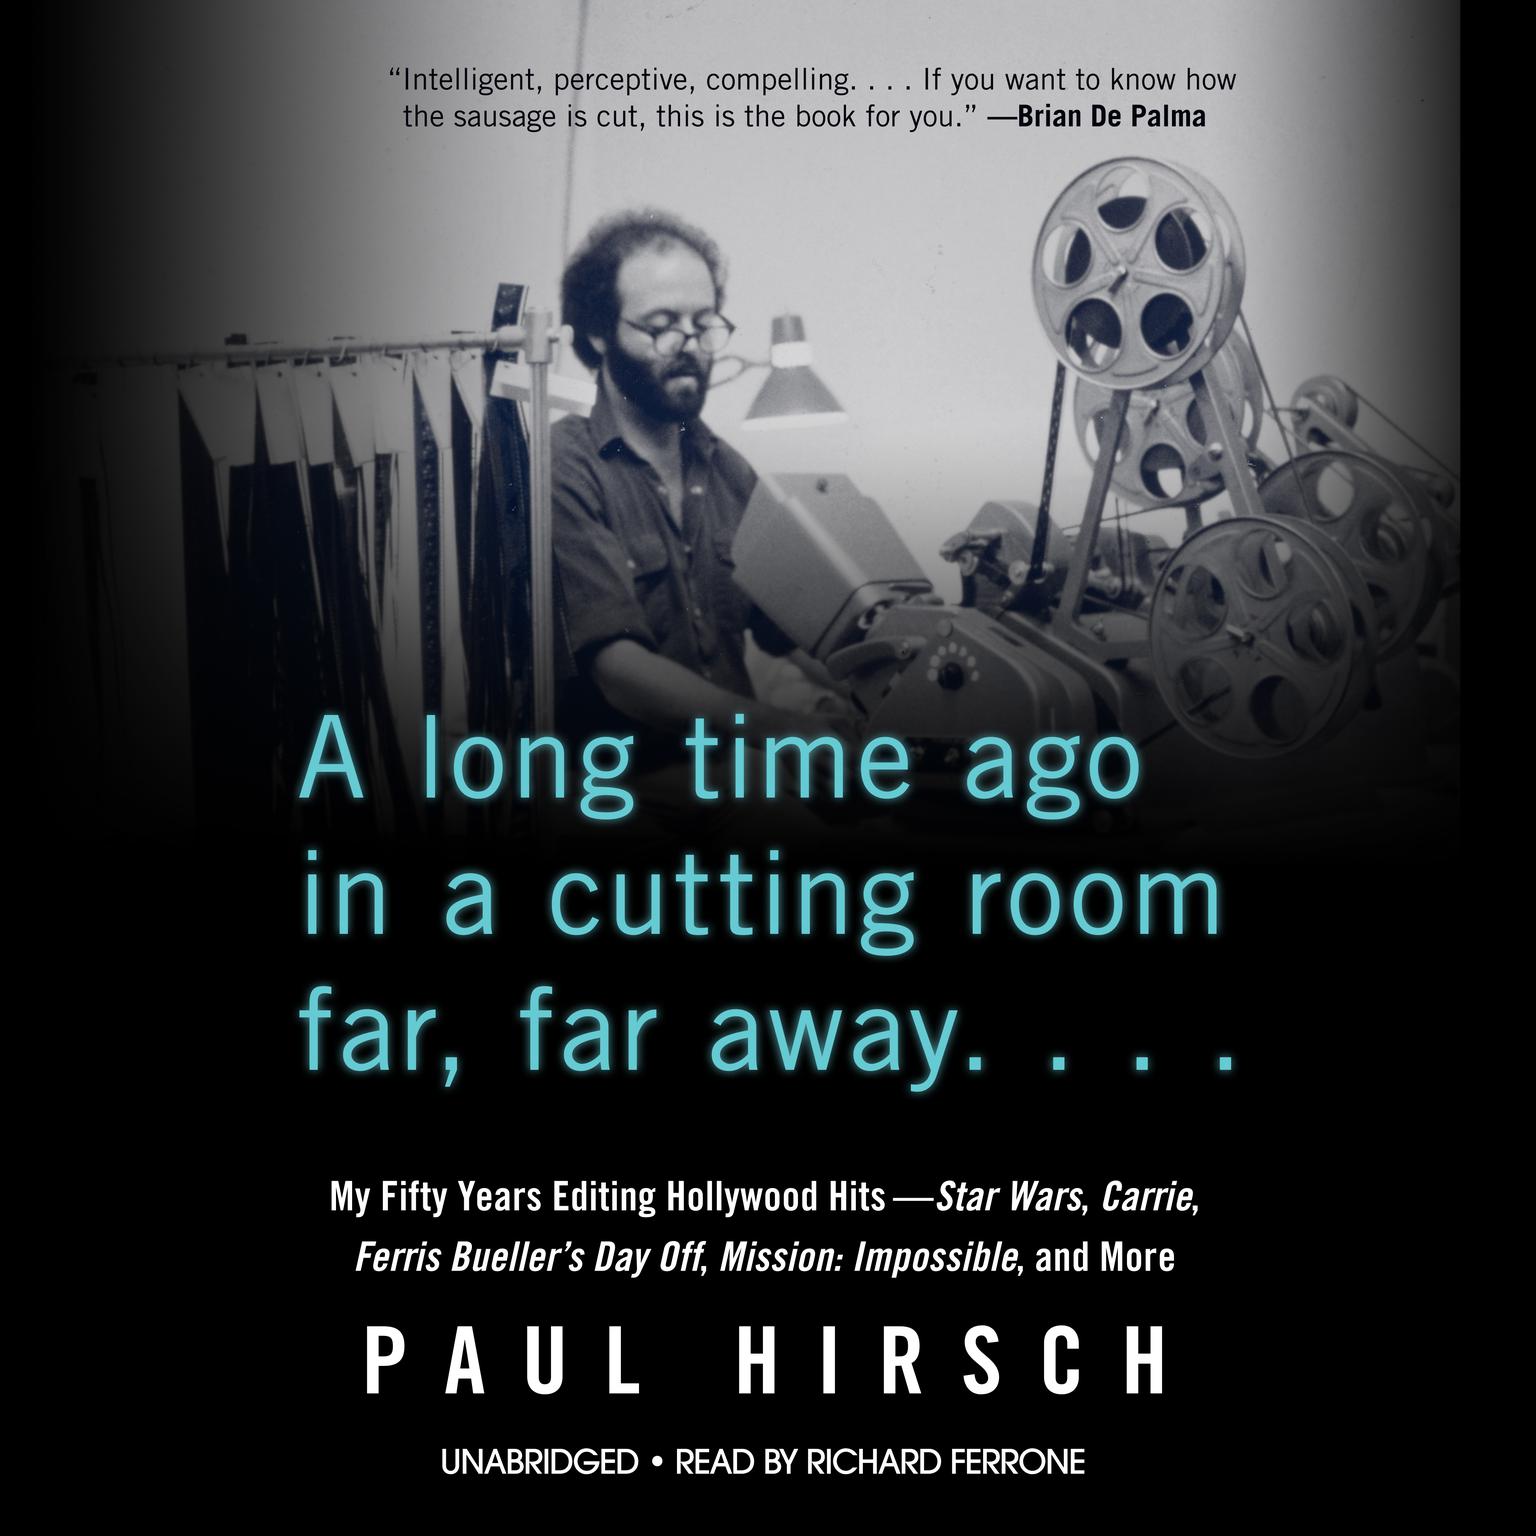 A Long Time Ago in a Cutting Room Far, Far Away: My Fifty Years Editing Hollywood Hits—Star Wars, Carrie, Ferris Bueller’s Day Off, Mission: Impossible, and More Audiobook, by Paul Hirsch